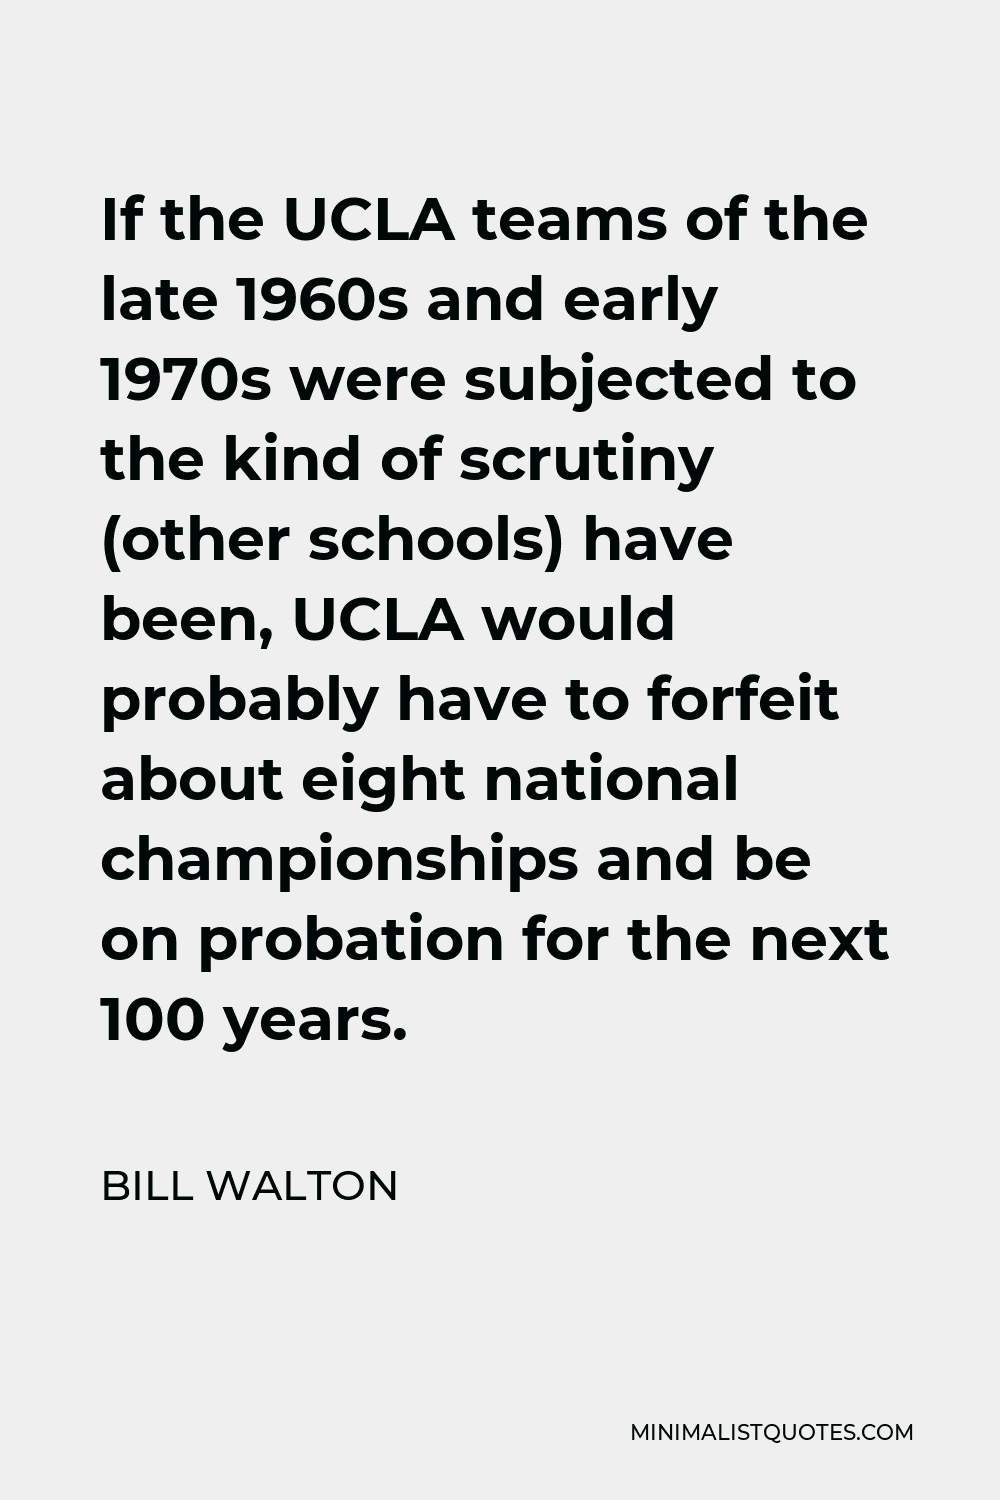 Bill Walton Quote - If the UCLA teams of the late 1960s and early 1970s were subjected to the kind of scrutiny (other schools) have been, UCLA would probably have to forfeit about eight national championships and be on probation for the next 100 years.